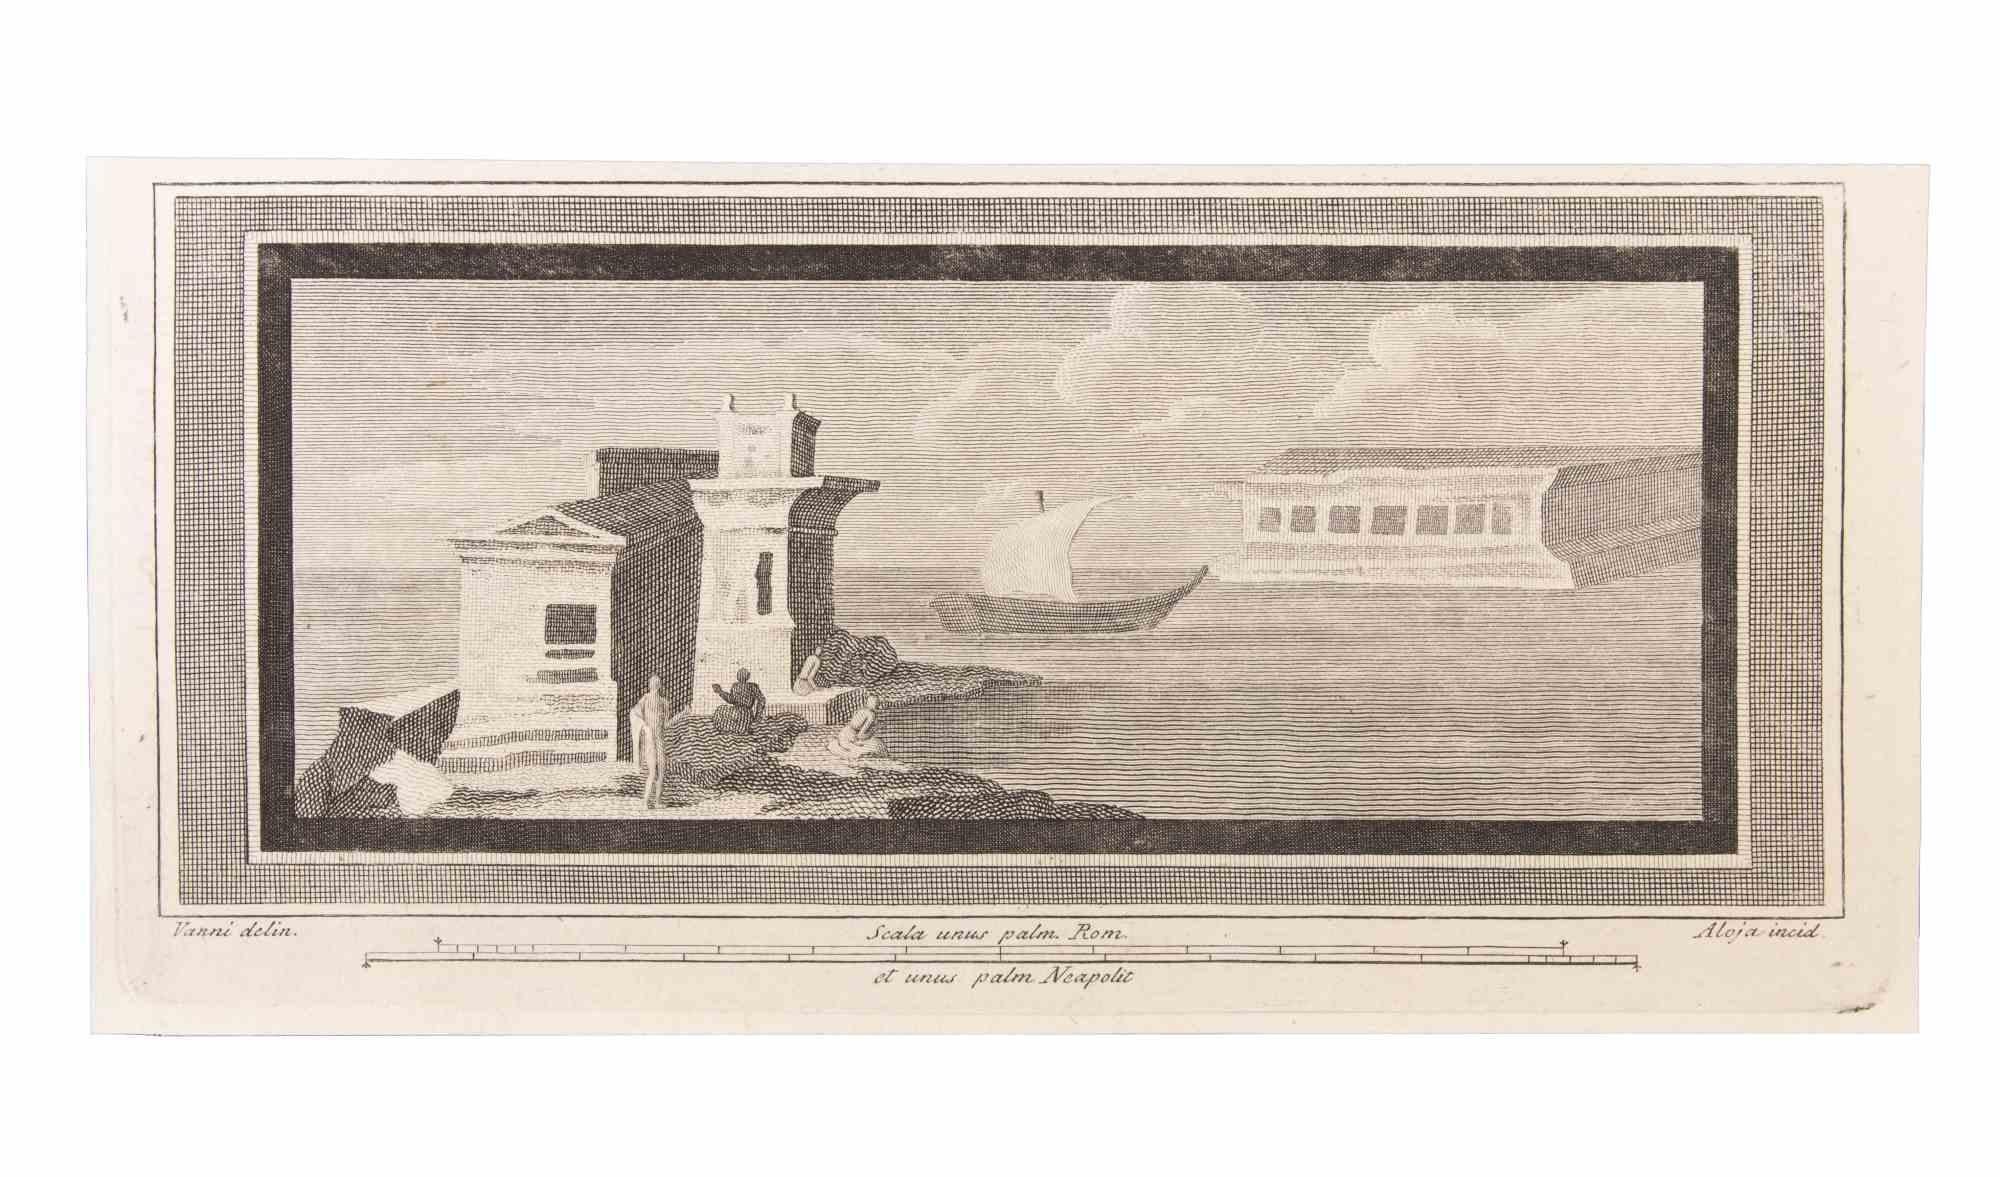 Seascape is an Etching realized by  Luigi Aloja (1783-1837).

The etching belongs to the print suite “Antiquities of Herculaneum Exposed” (original title: “Le Antichità di Ercolano Esposte”), an eight-volume volume of engravings of the finds from